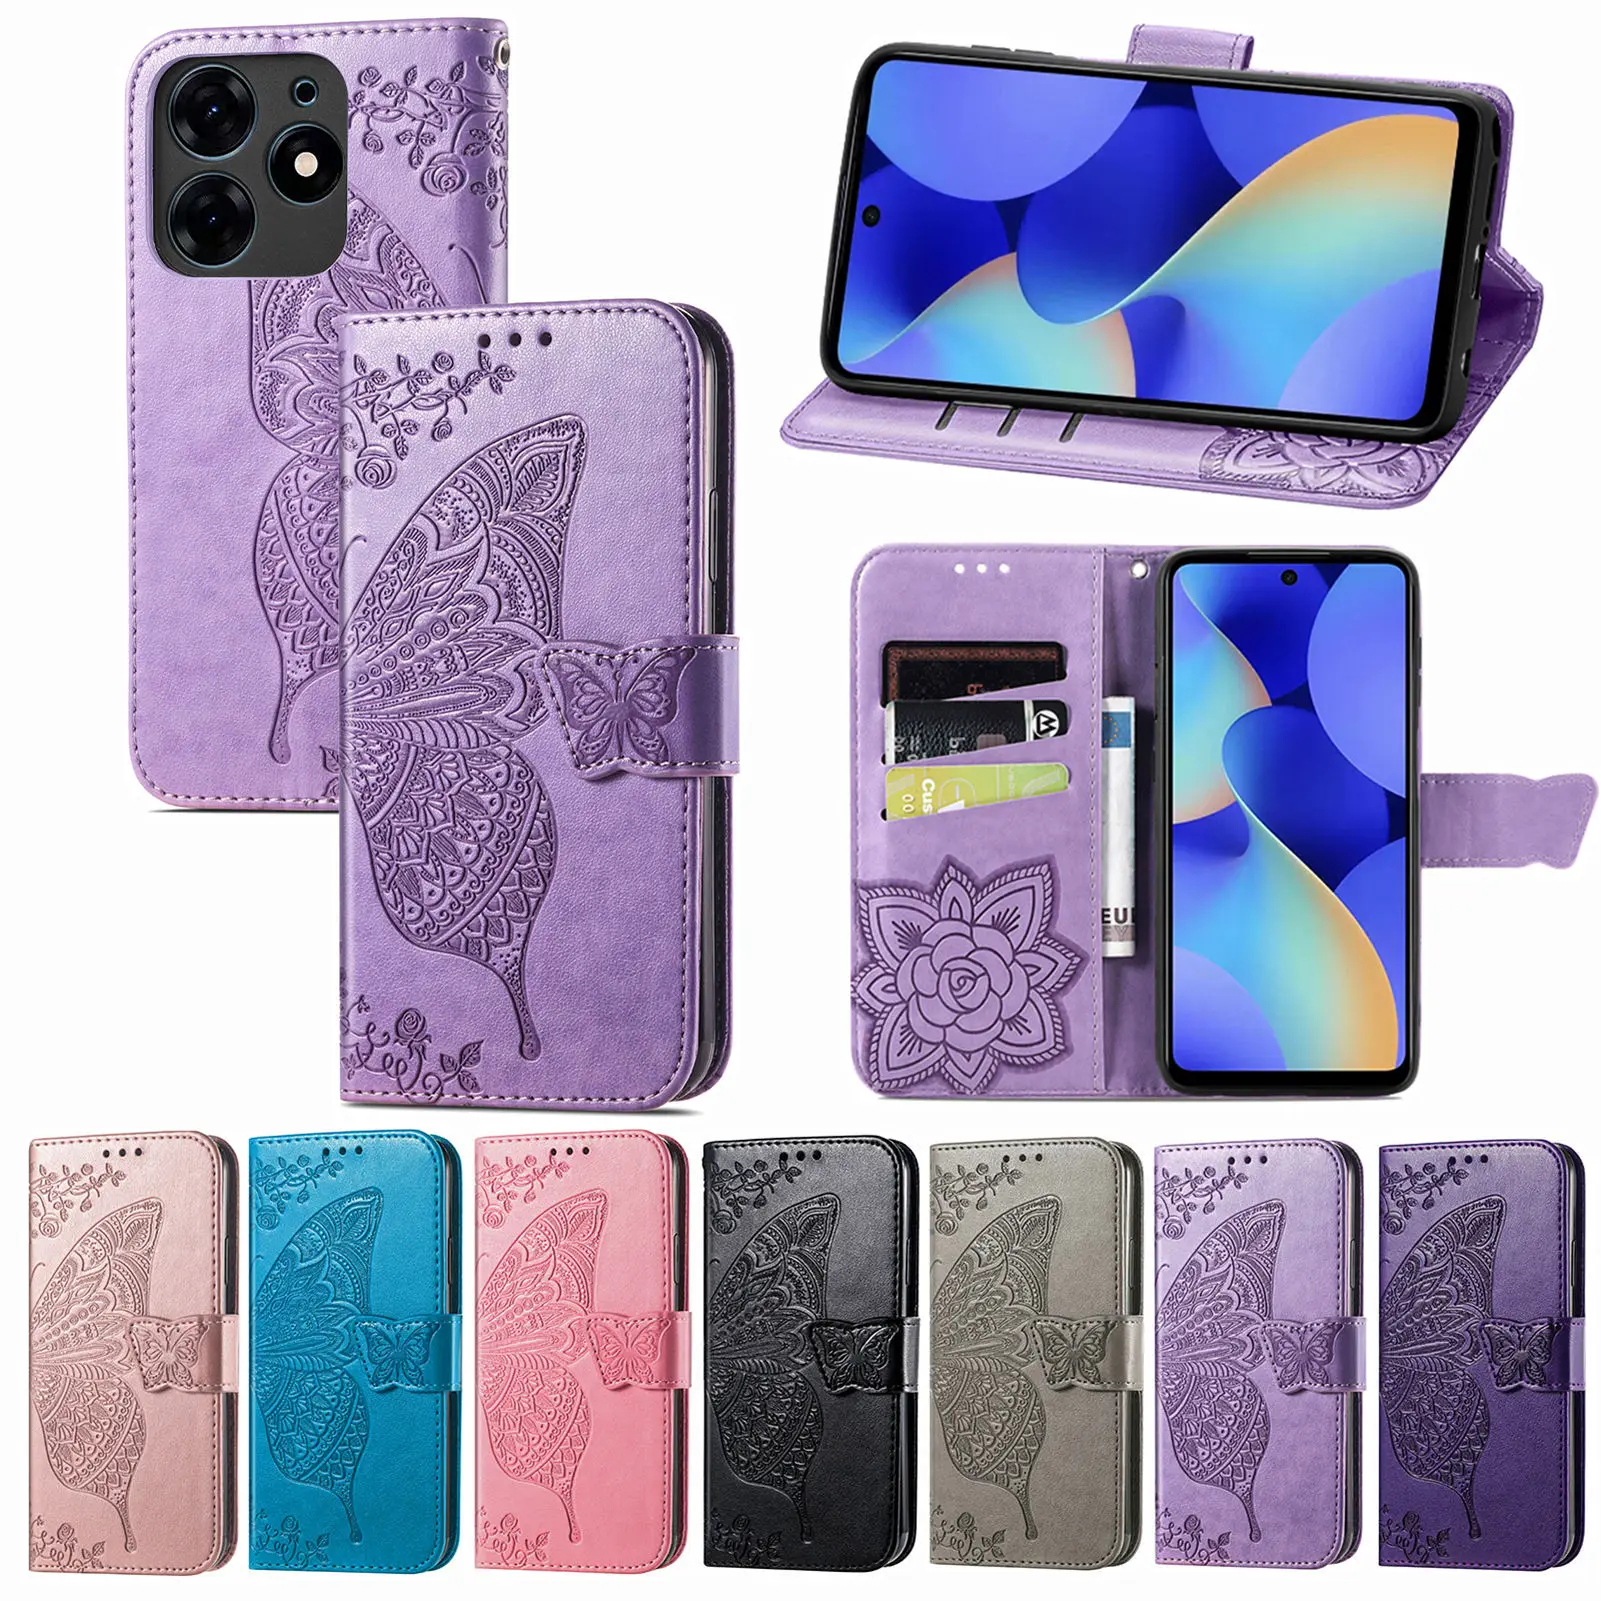 

For Tecno Spark 8C 10 Pro Case Wallet Insert Card Pouch Butterfly Embossed Leather Cover For Tecno Pova 4 3 Neo 2 Pop 5 Camon 18